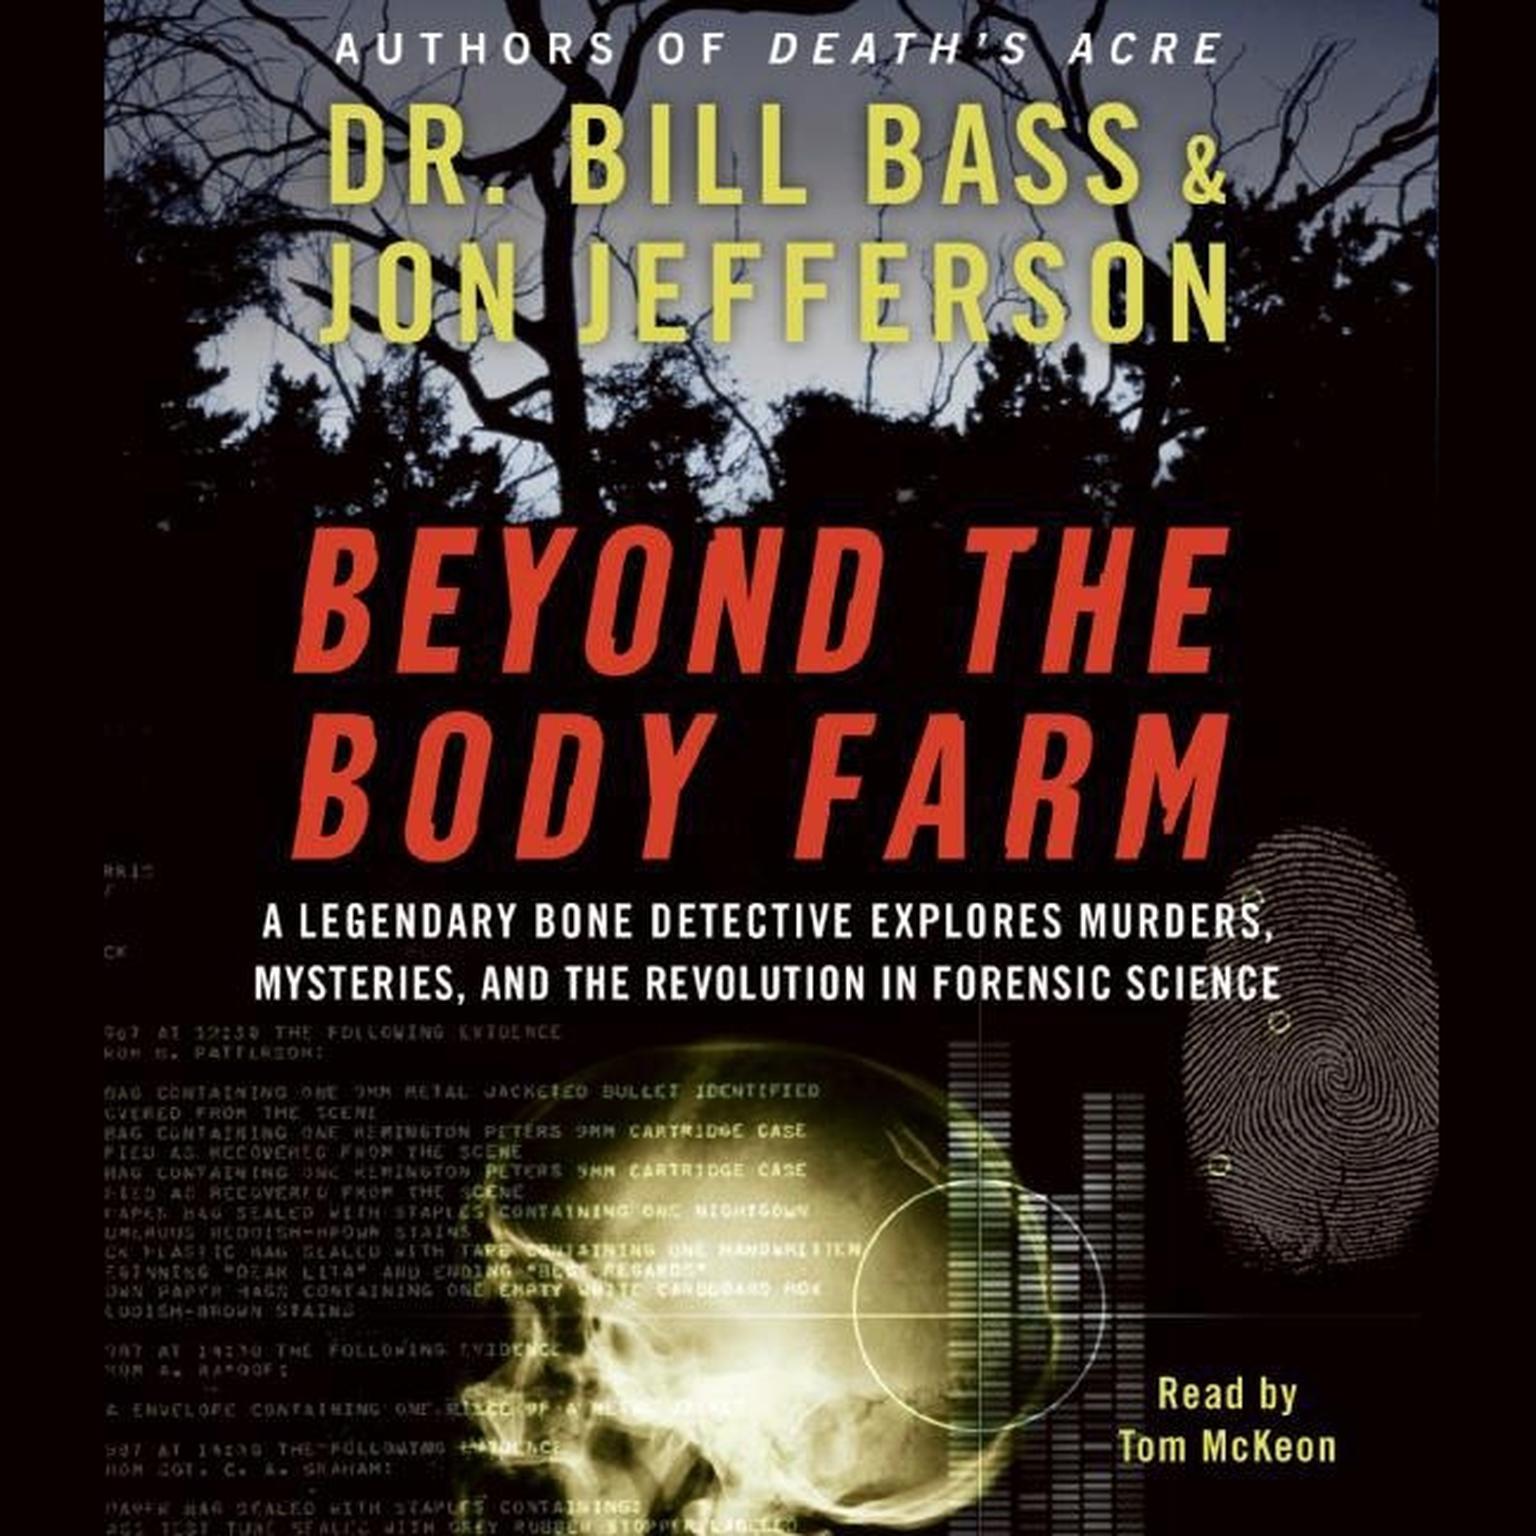 Beyond the Body Farm (Abridged): A Legendary Bone Detective Explores Murders, Mysteries, and the Revolution in Forensic Science Audiobook, by Bill Bass